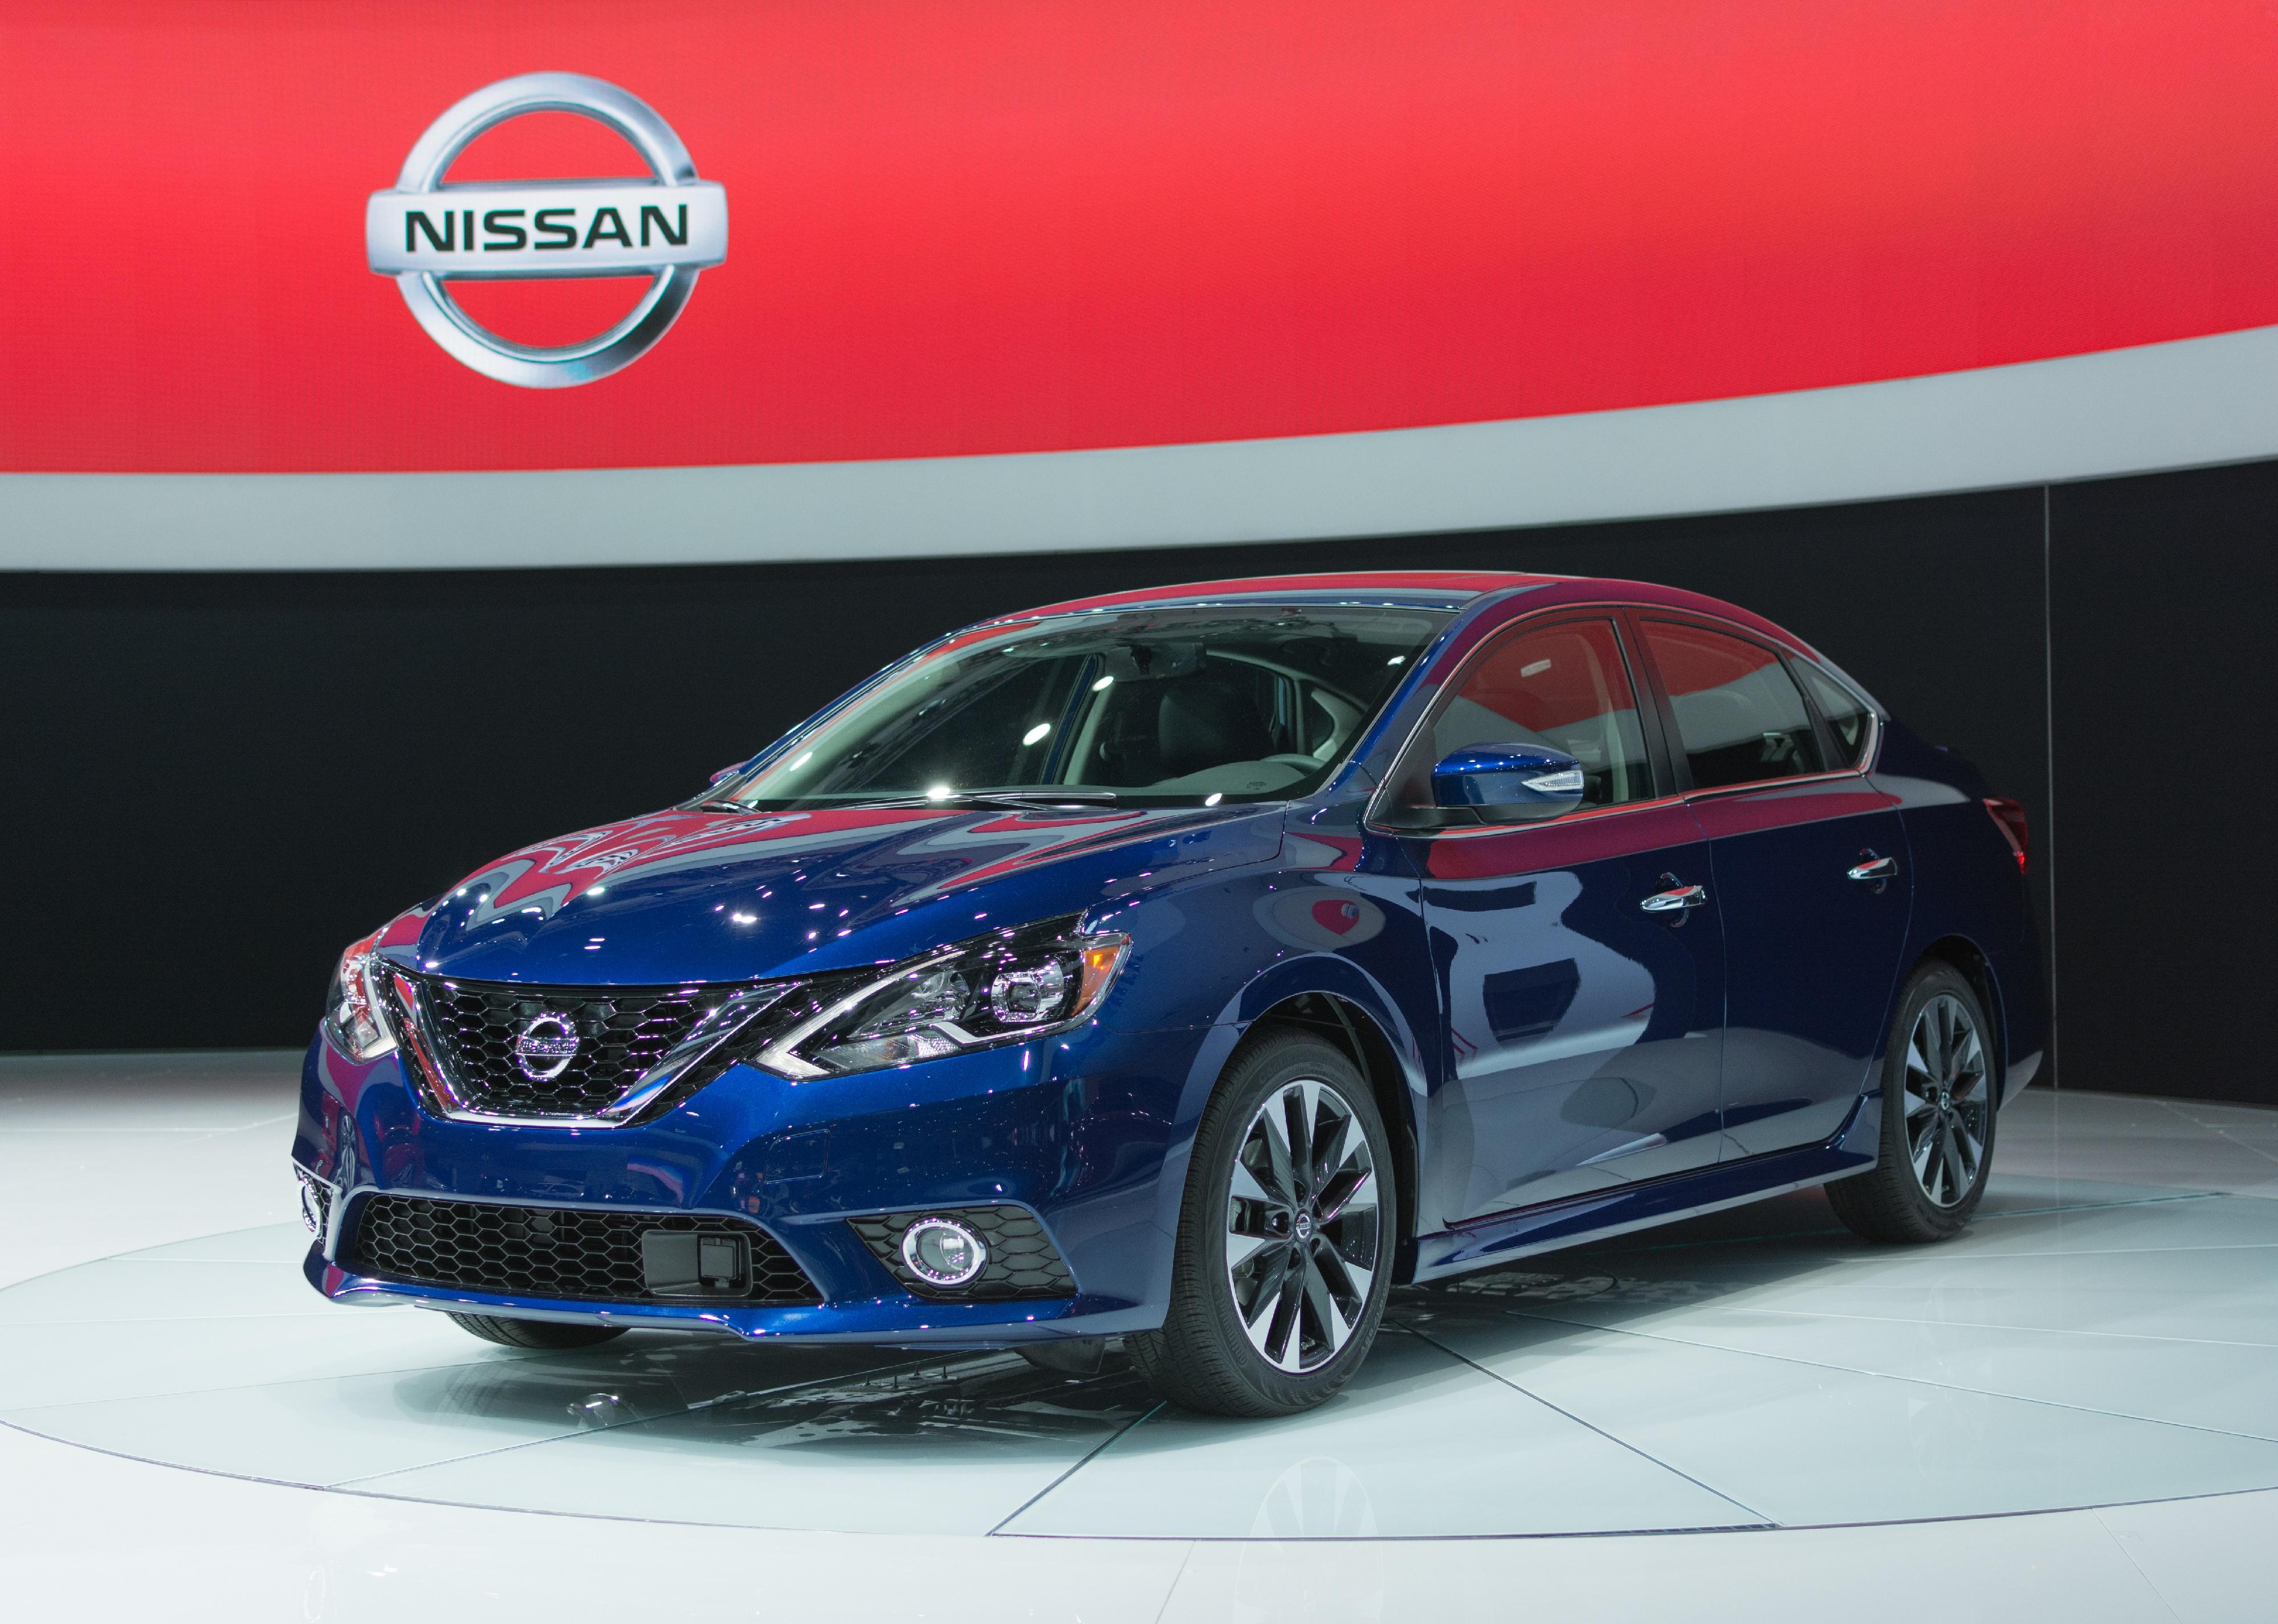 Nissan Sentra on display during the 2015 Los Angeles Auto Show.